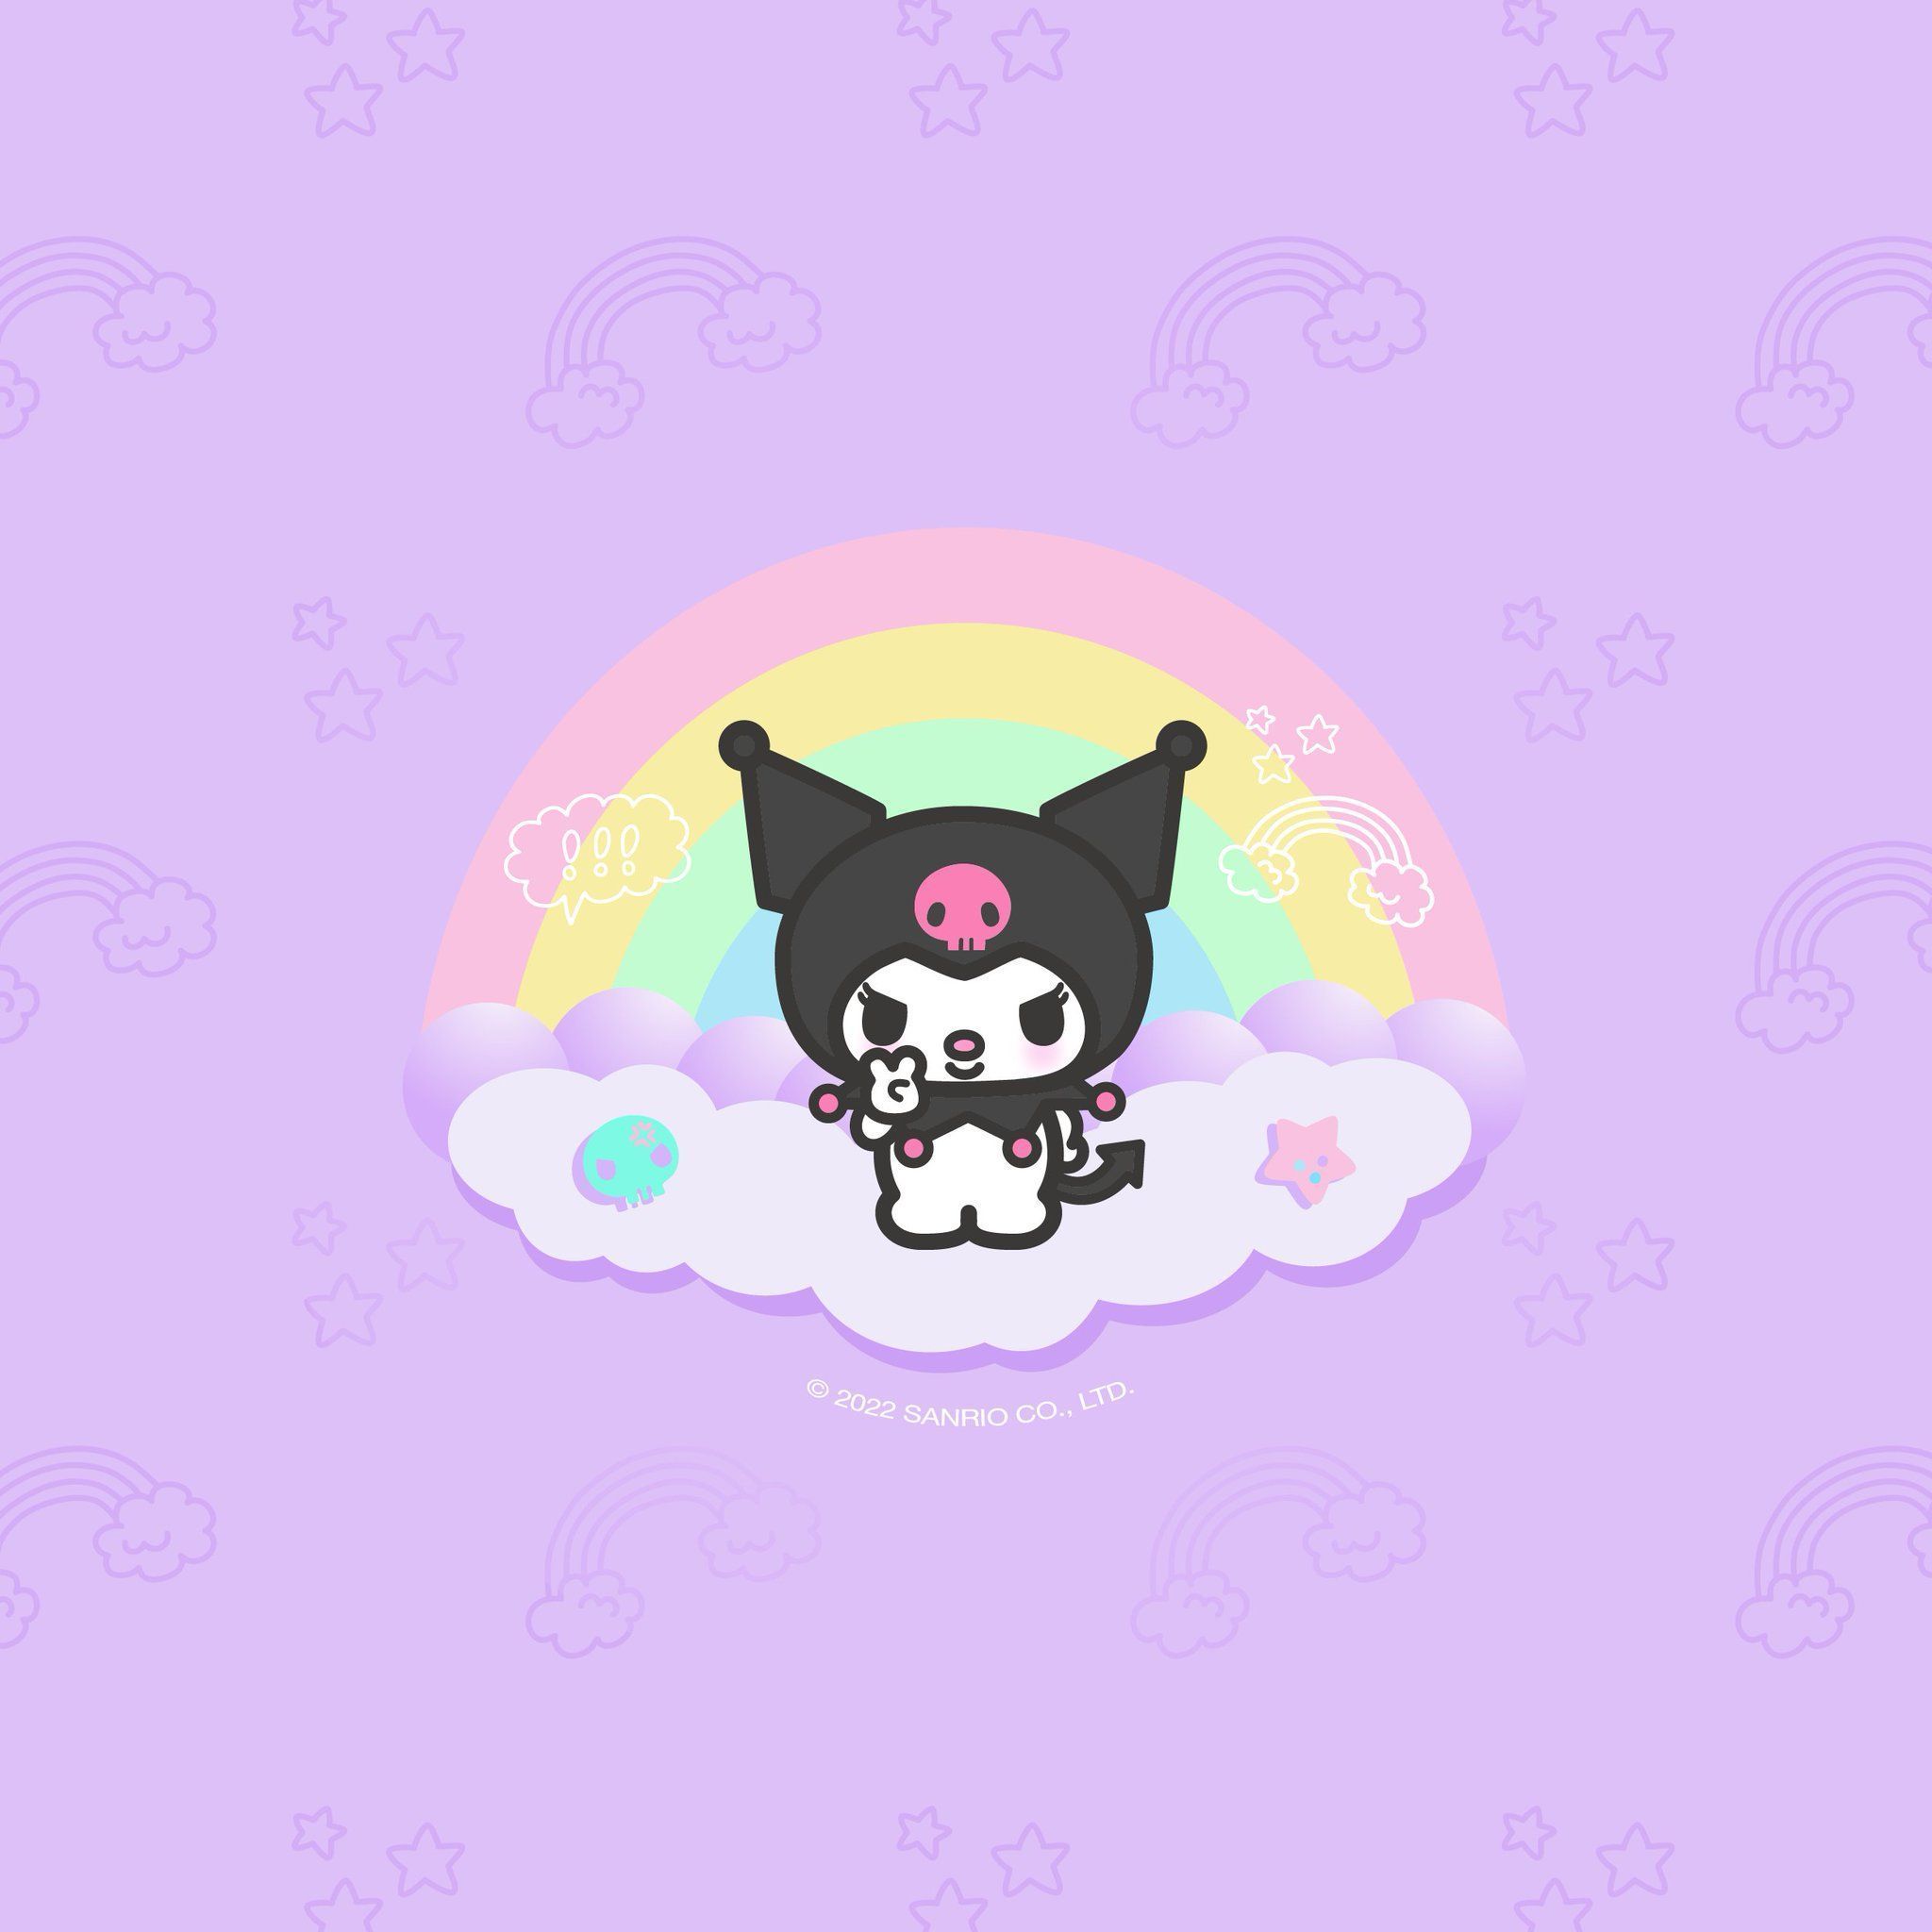 Take #Kuromi on the go with new background for your phone!